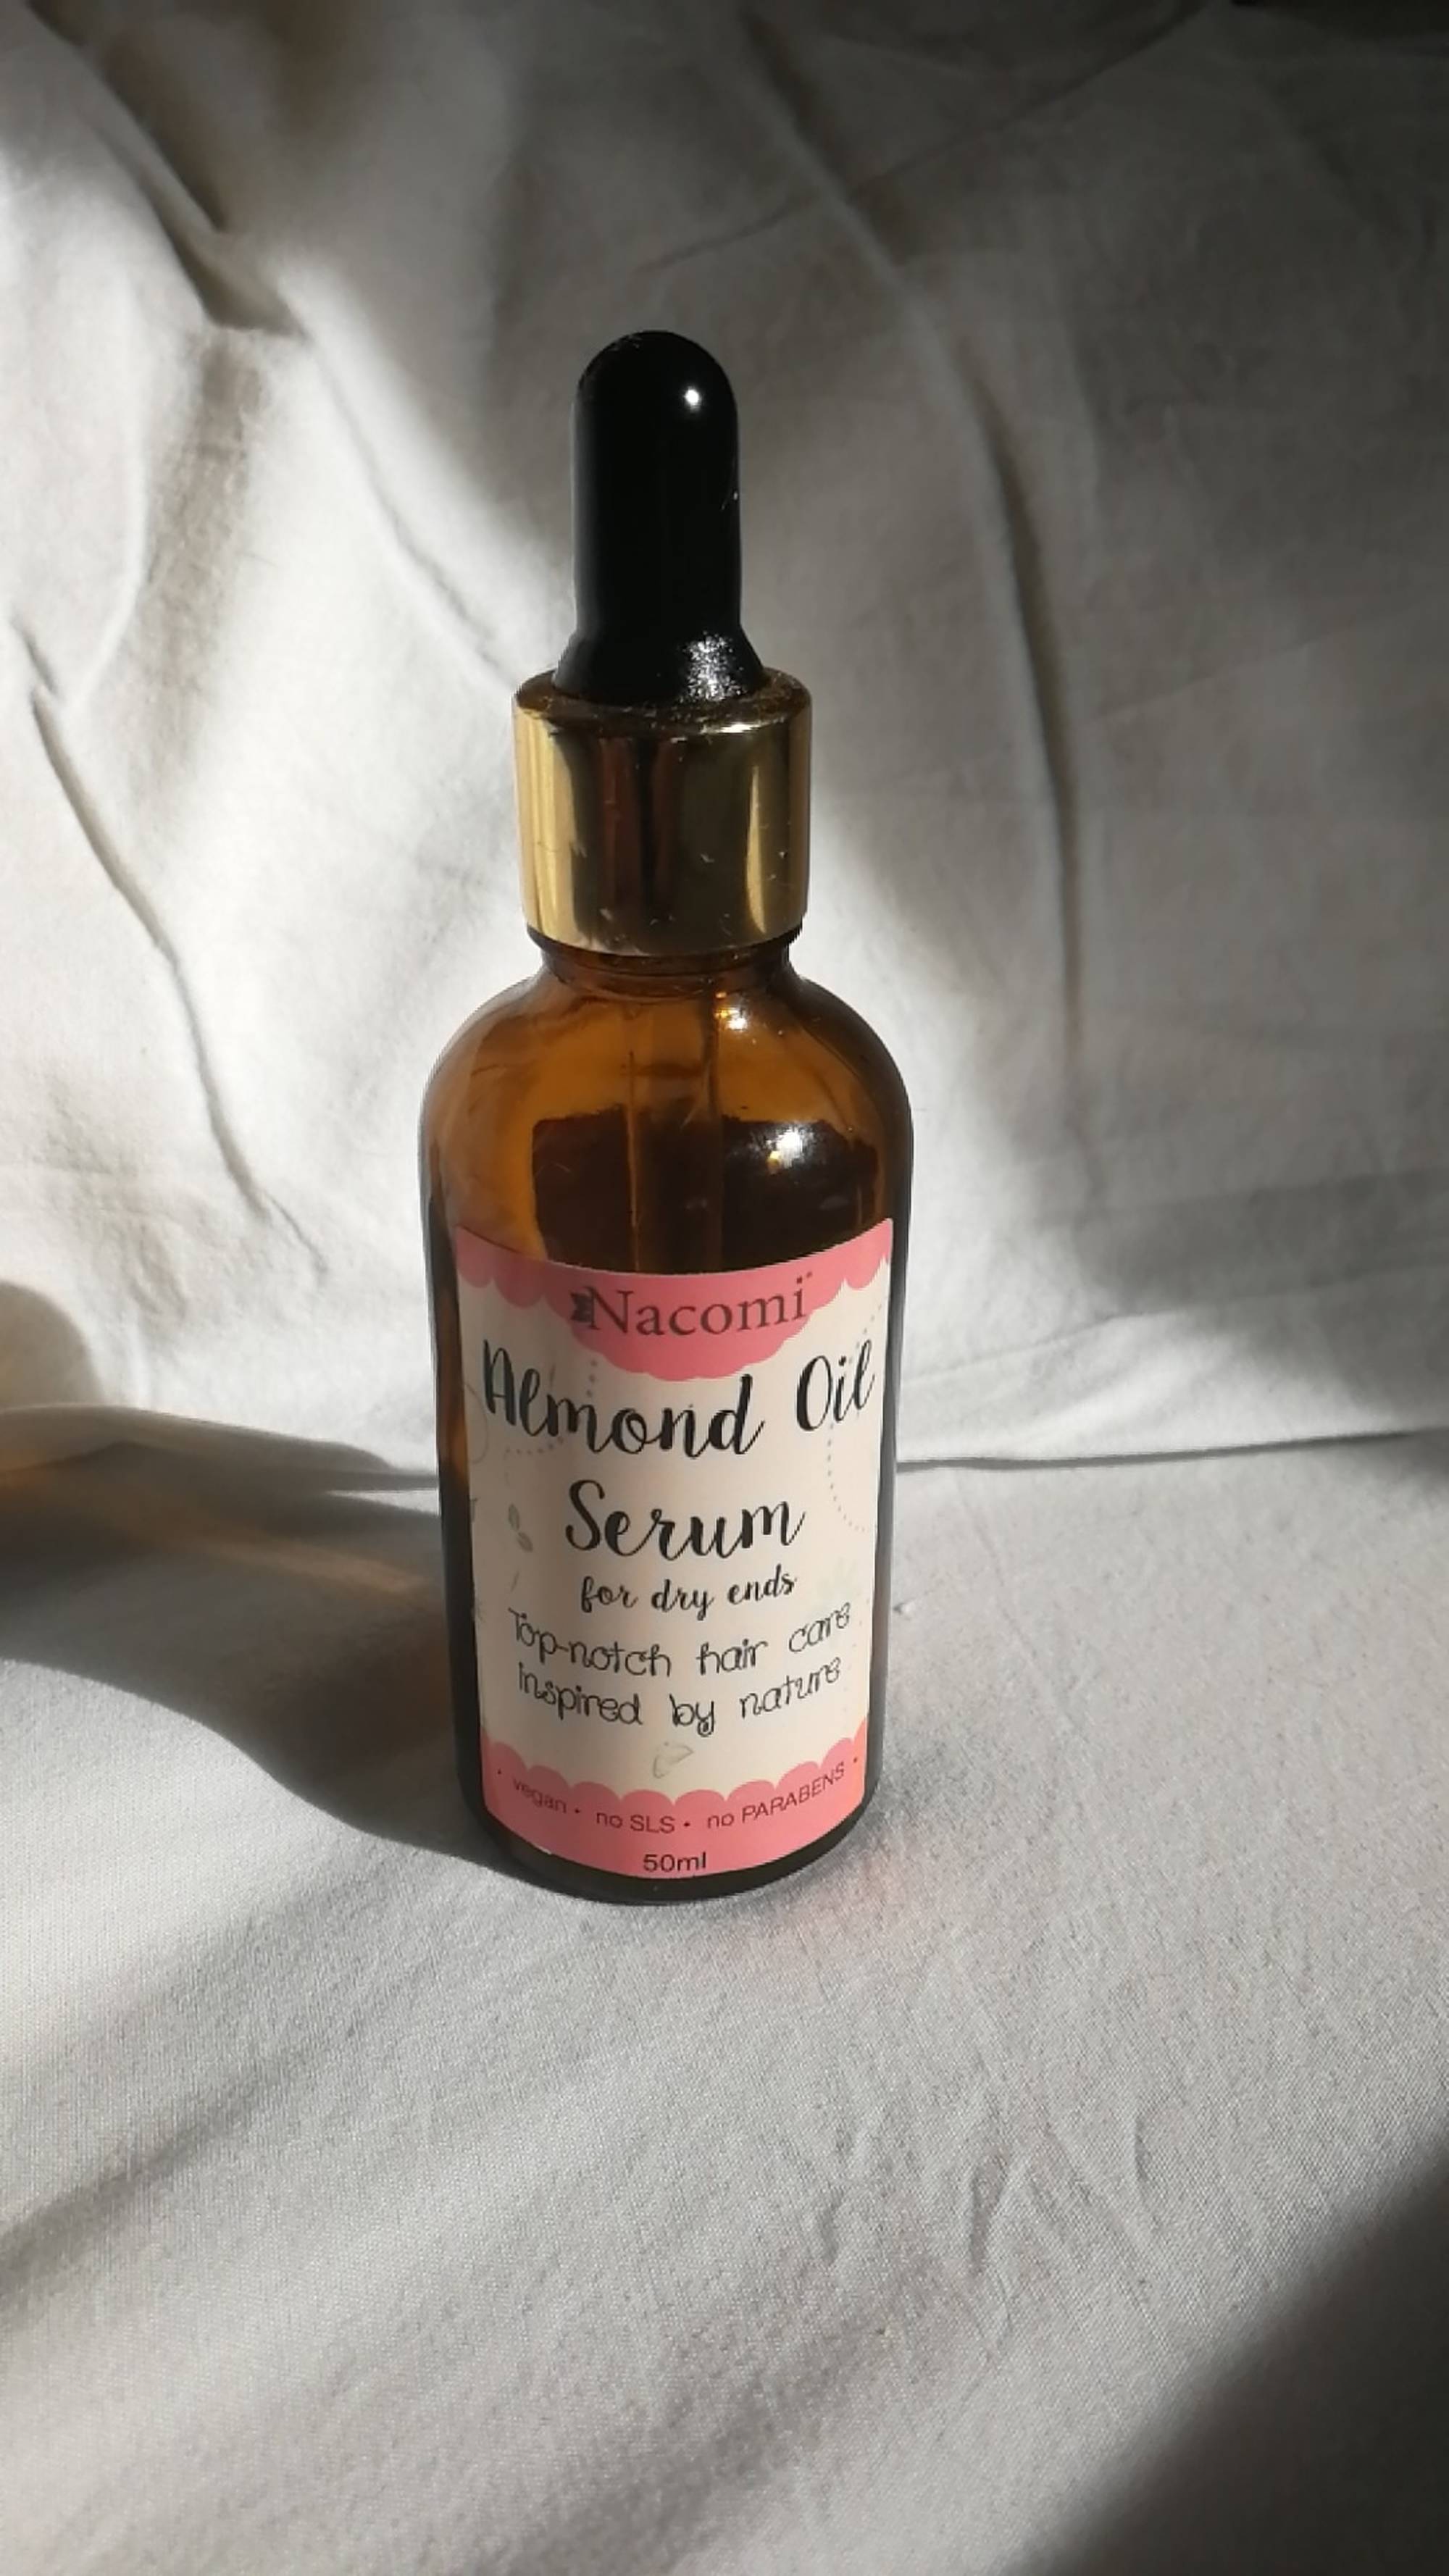 NACOMI - Almond oil serum for dry ends